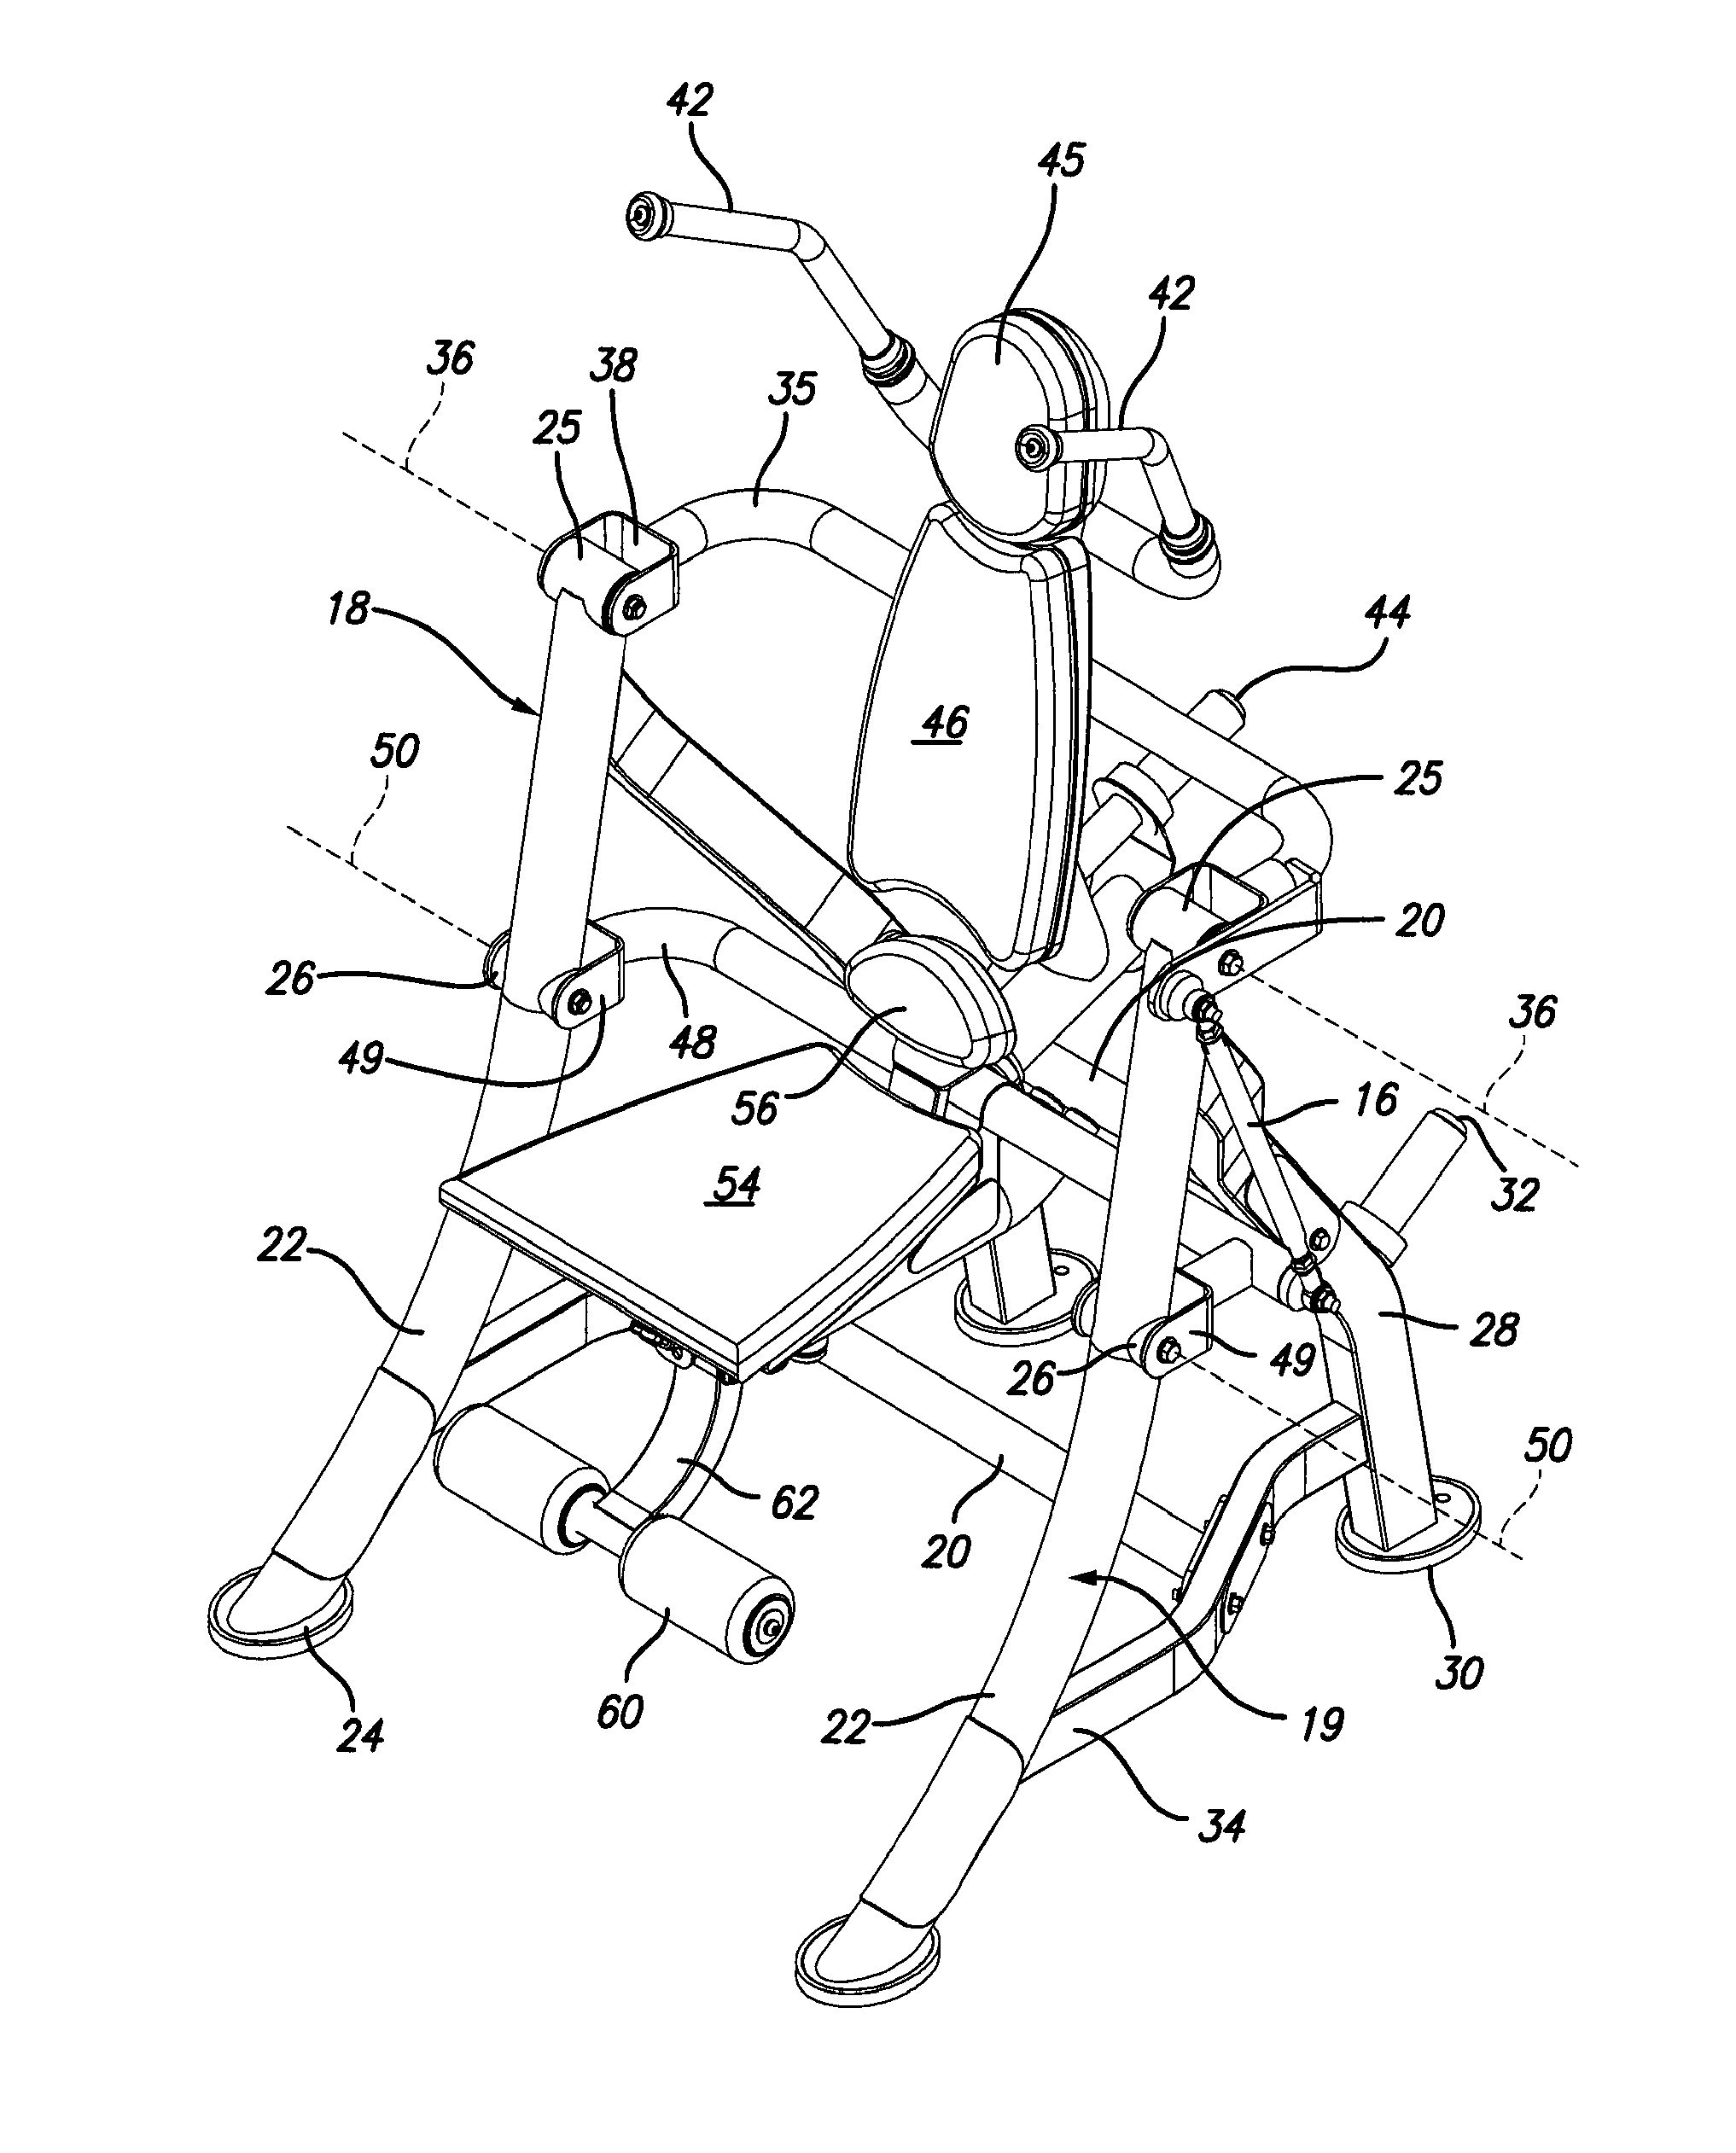 Exercise machine with two-directional pivoting user support